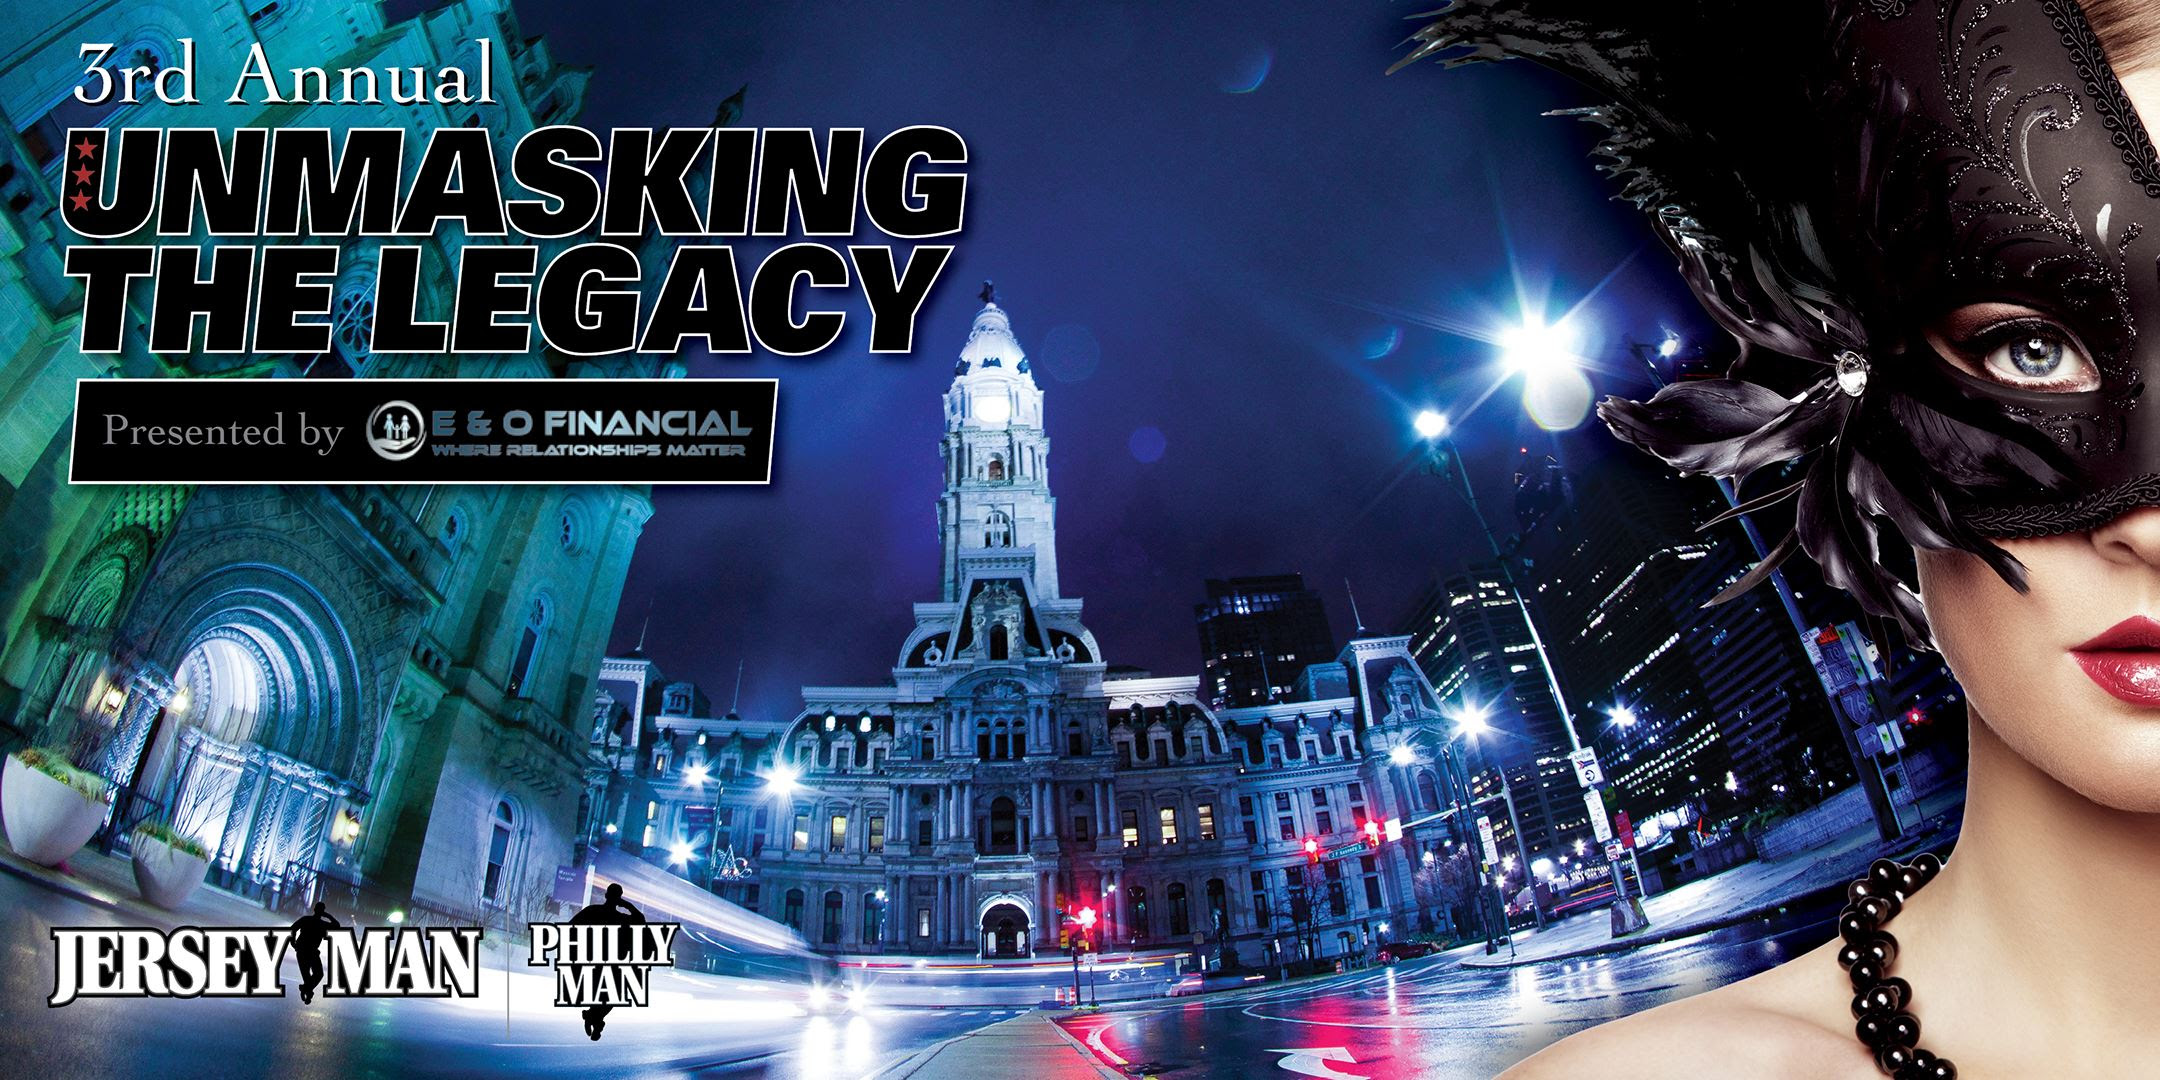 JerseyMan and PhillyMan Magazine Hosts 3rd Annual Unmasking the Legacy Gala